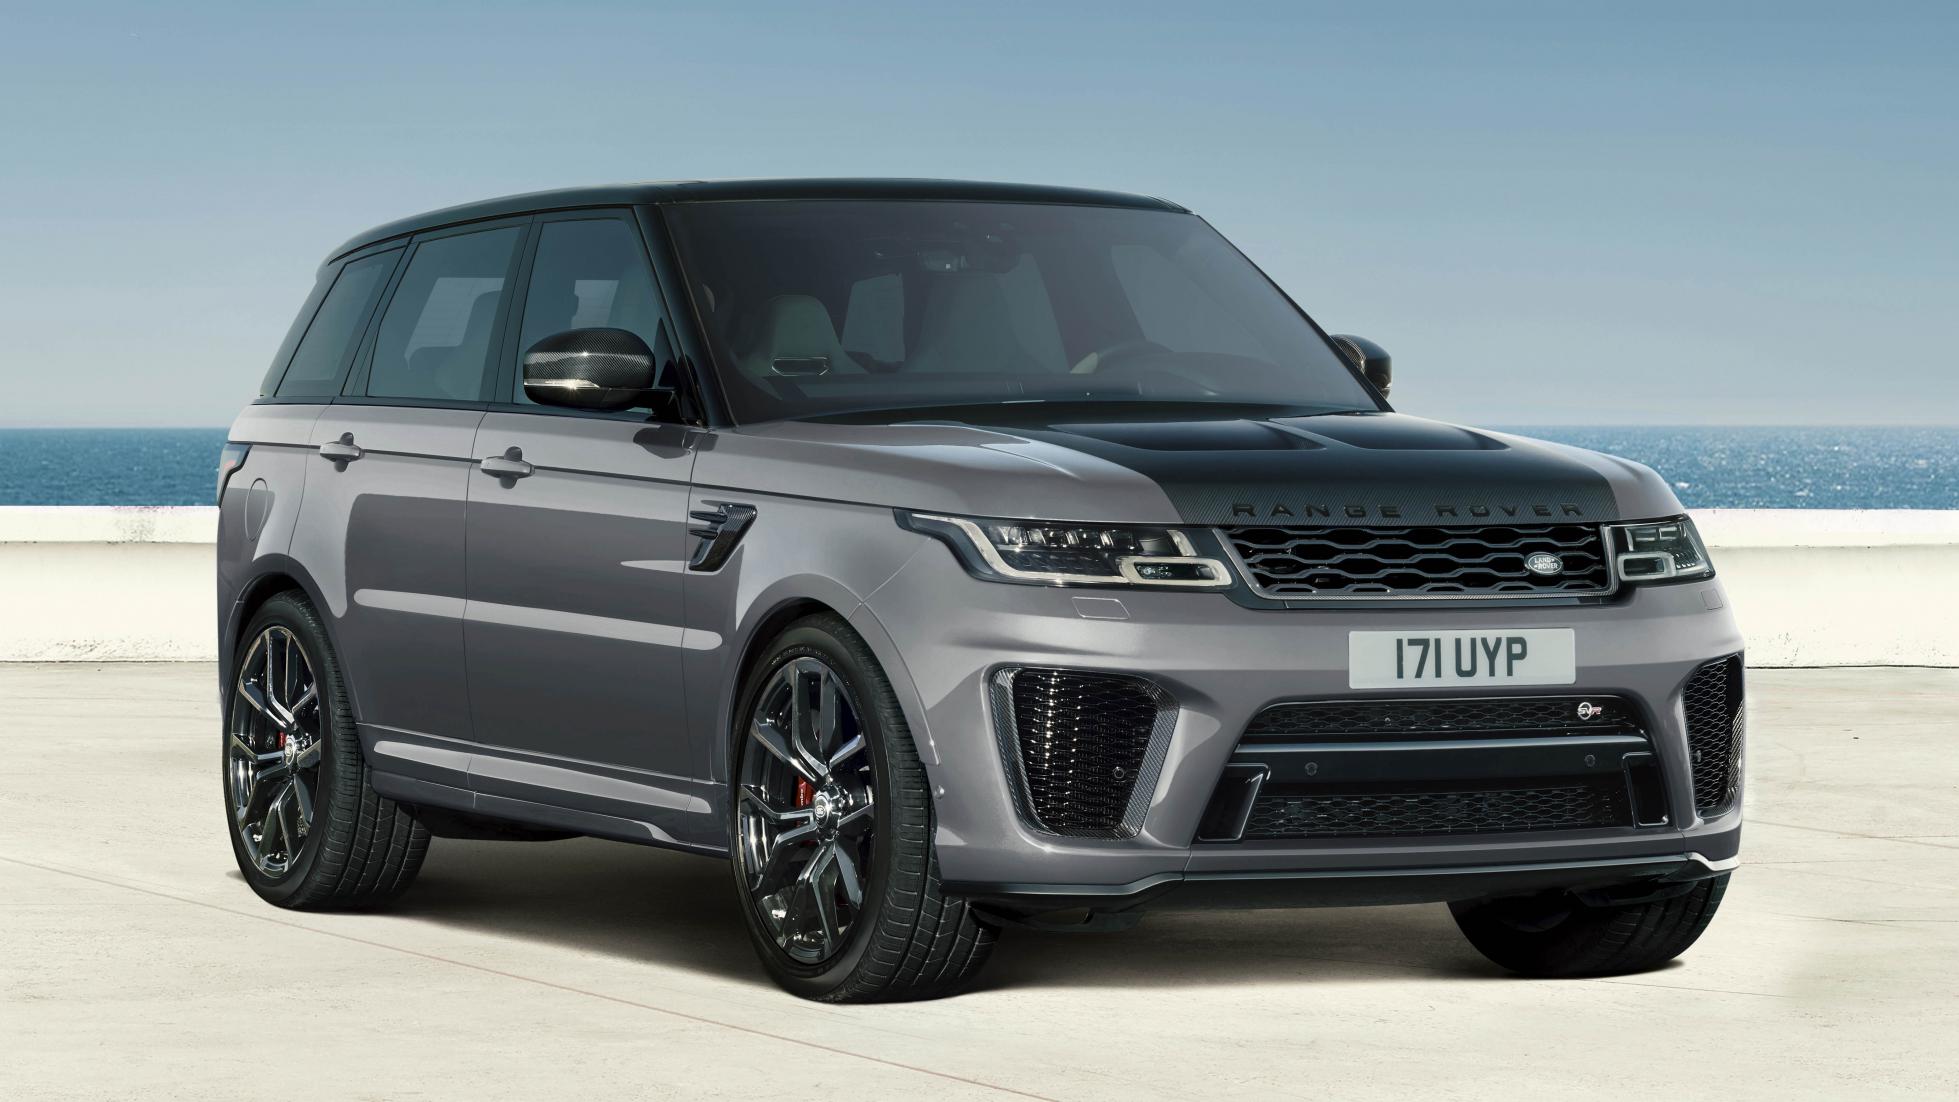 TopGear This is the new Range Rover Sport Black edition